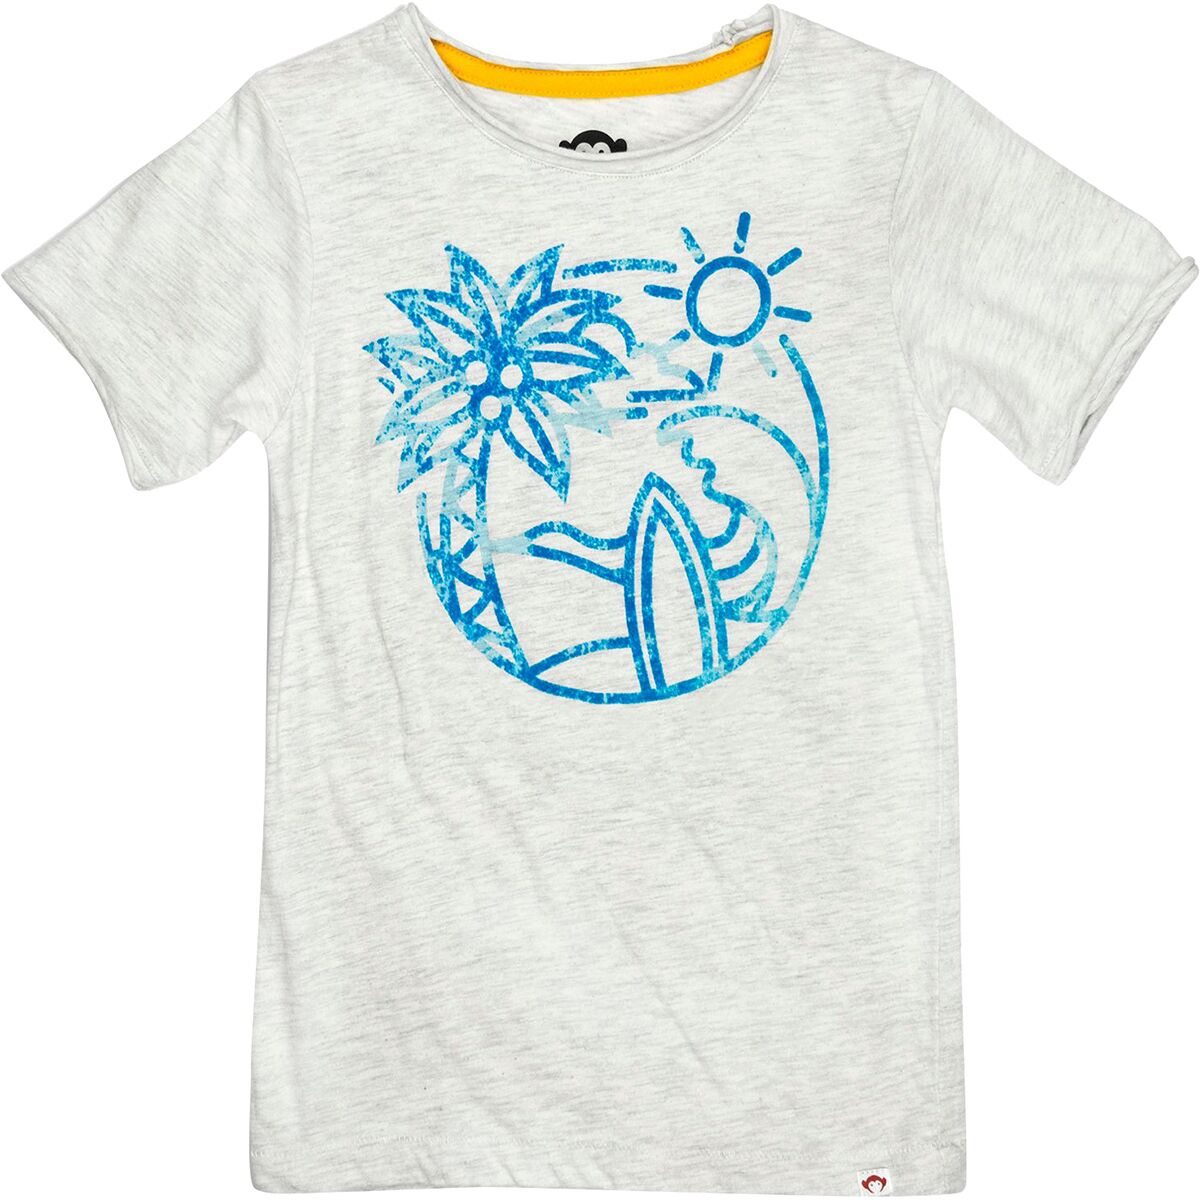 Appaman Day Surf Graphic T-Shirt - Toddlers'